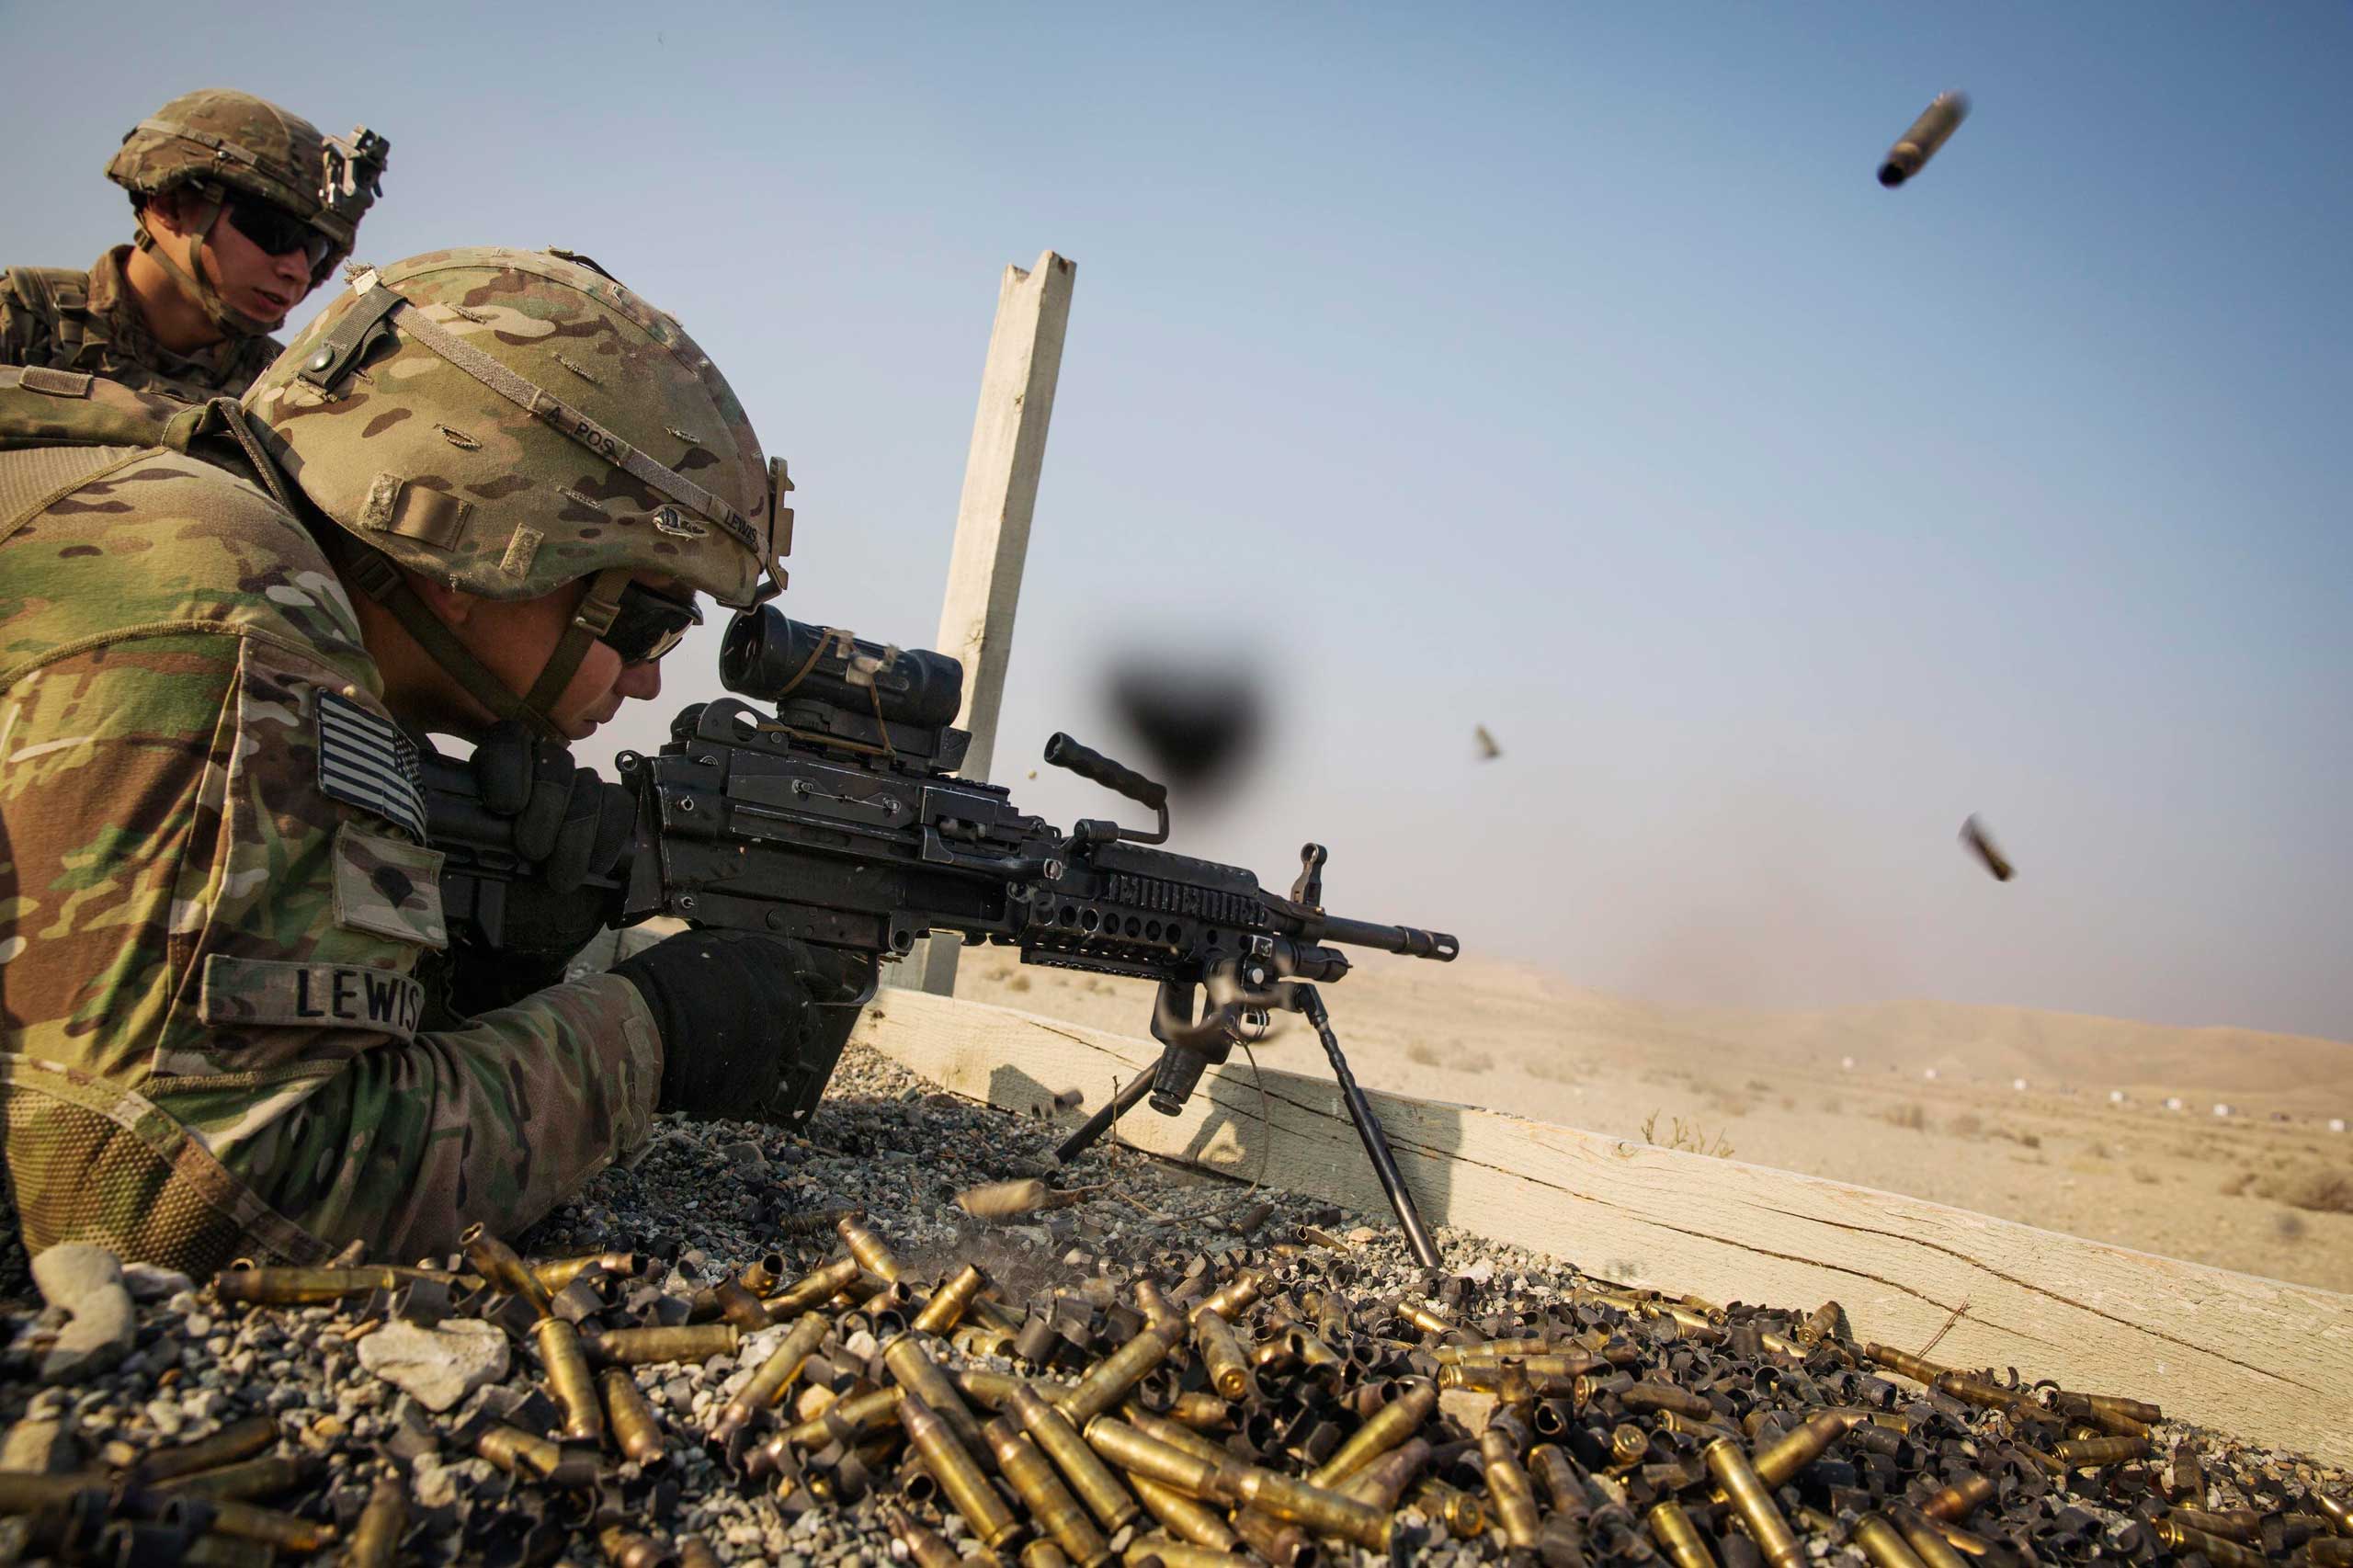 A U.S. soldier from the 3rd Cavalry Regiment is watched as he fires a squad automatic weapon during a training mission near forward operating base Gamberi, in the Laghman province of Afghanistan on Dec. 15, 2014.